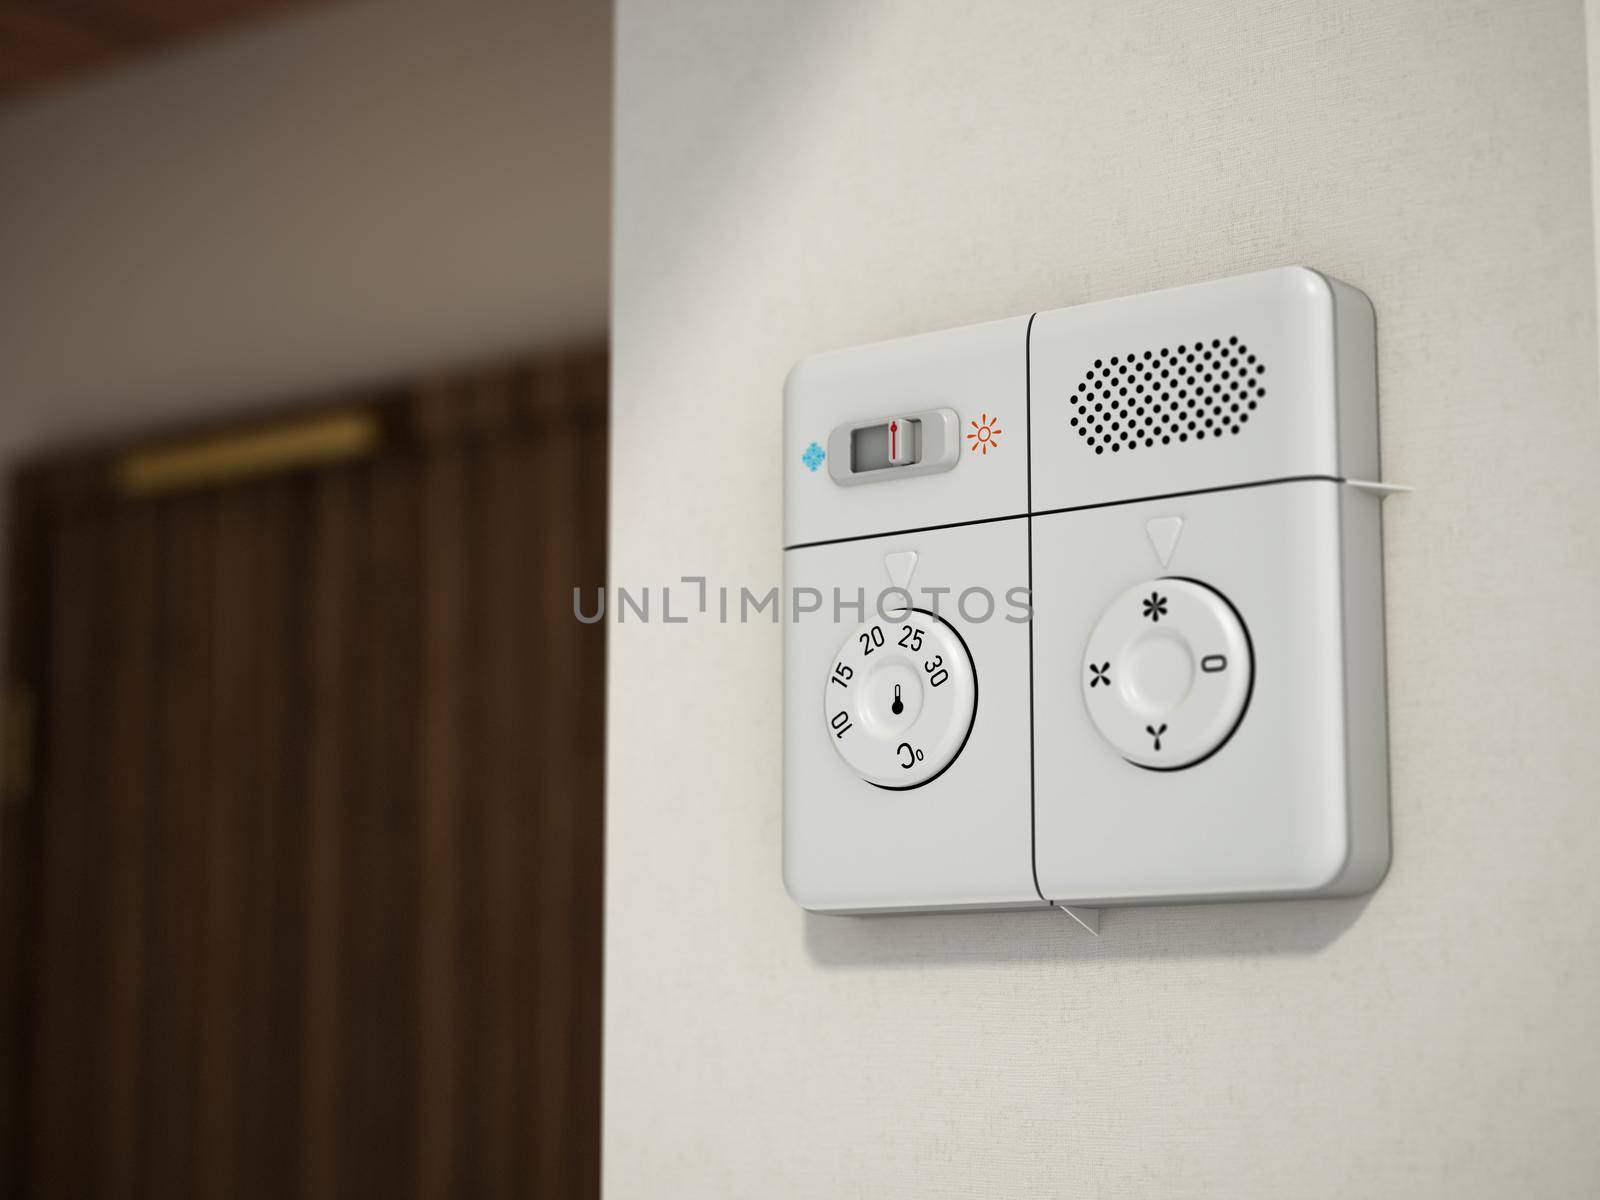 Hotel room air conditioning adjustment panel. 3D illustration by Simsek